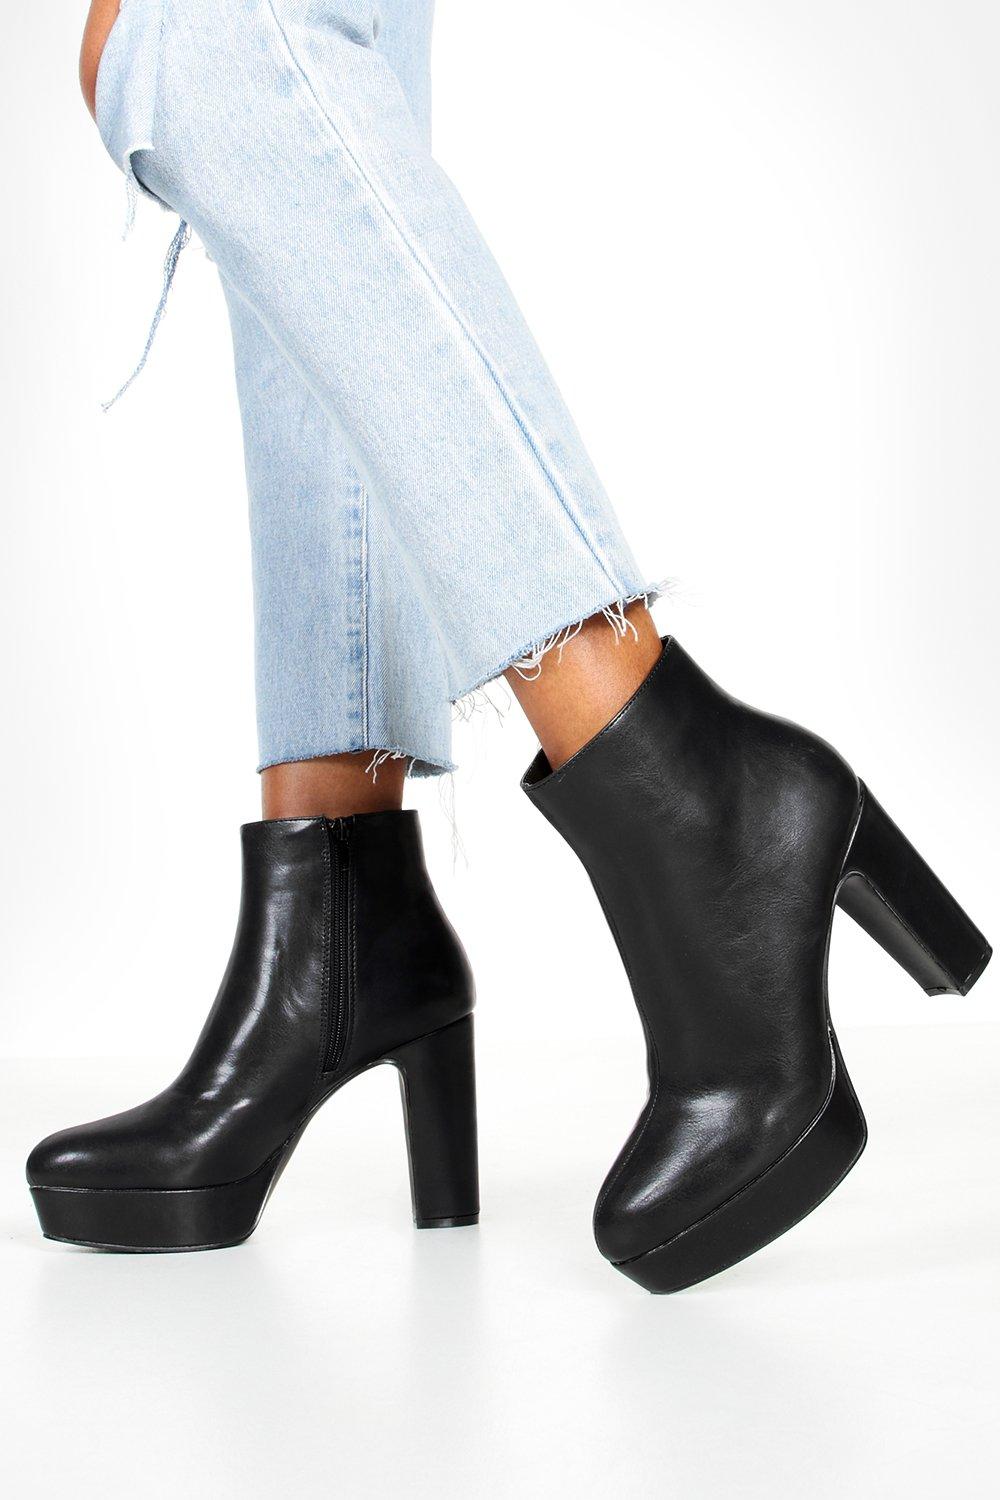 boohoo shoes and boots